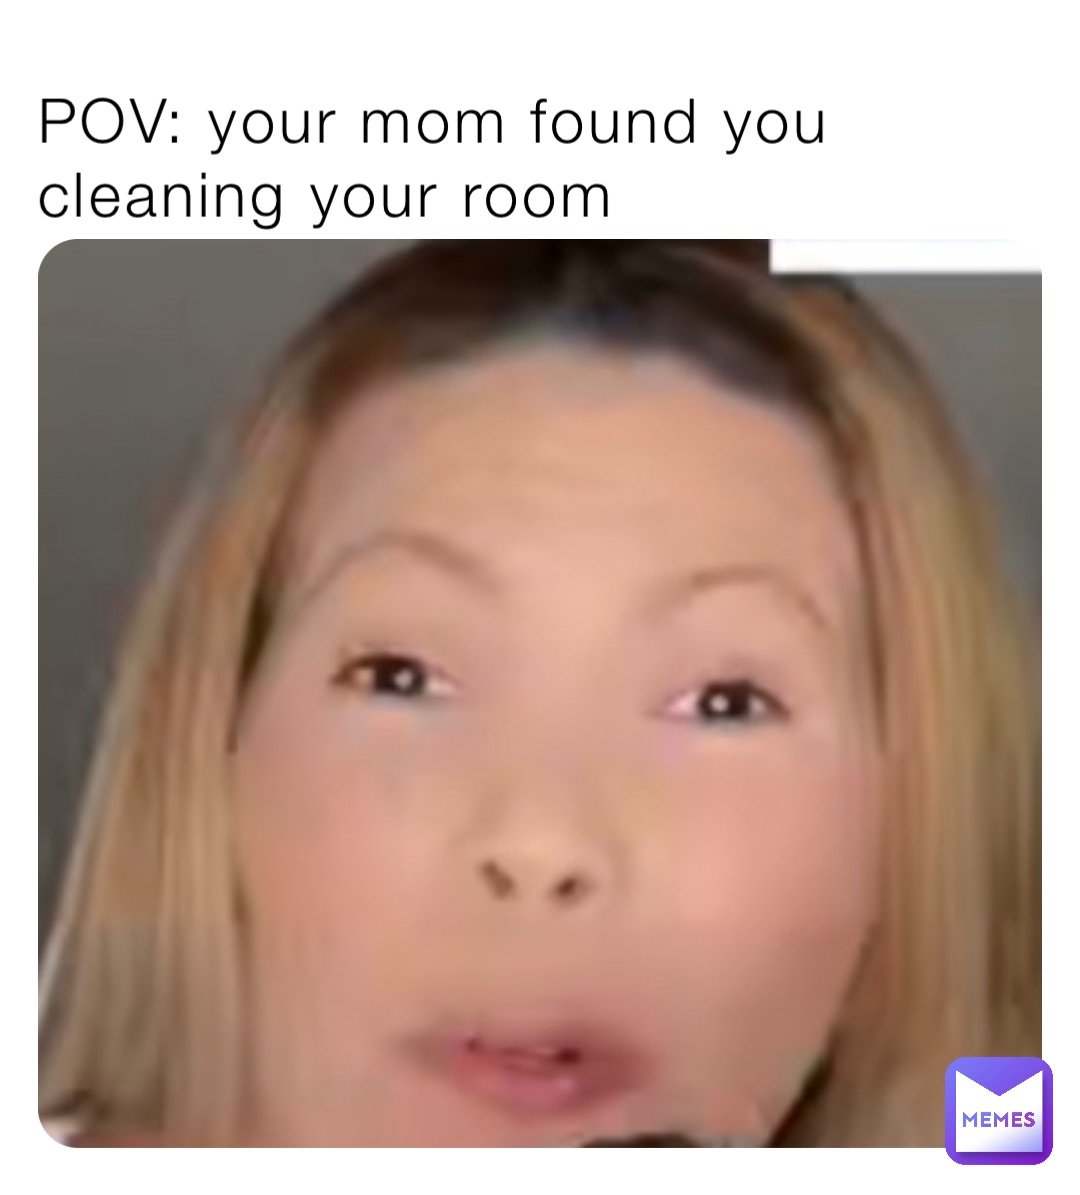 POV: your mom found you cleaning your room